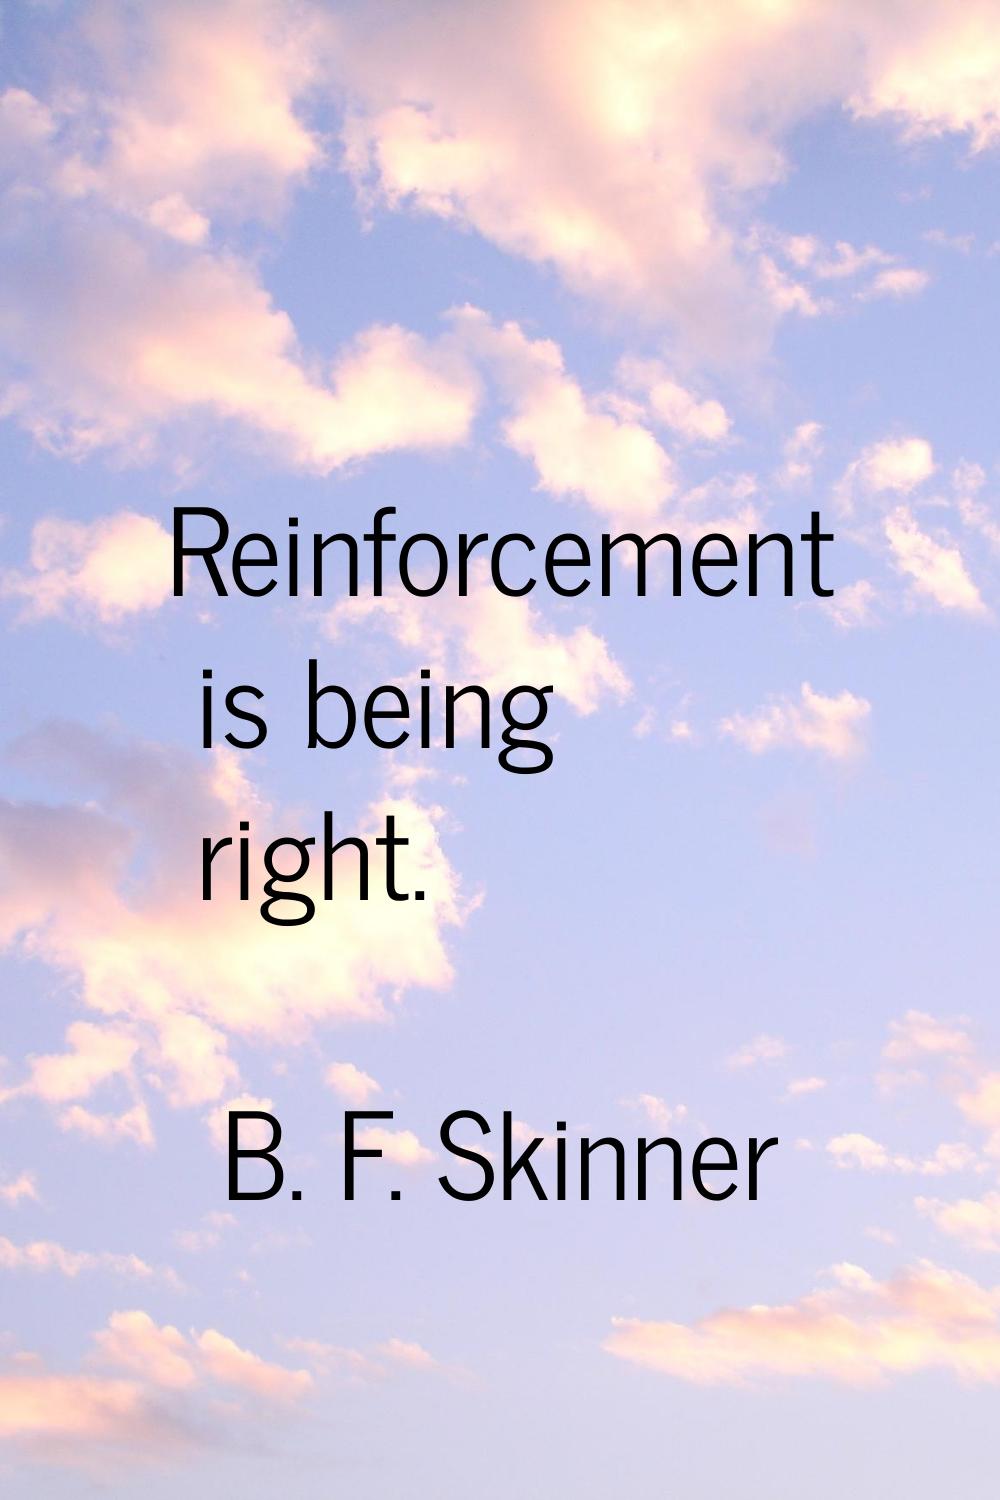 Reinforcement is being right.